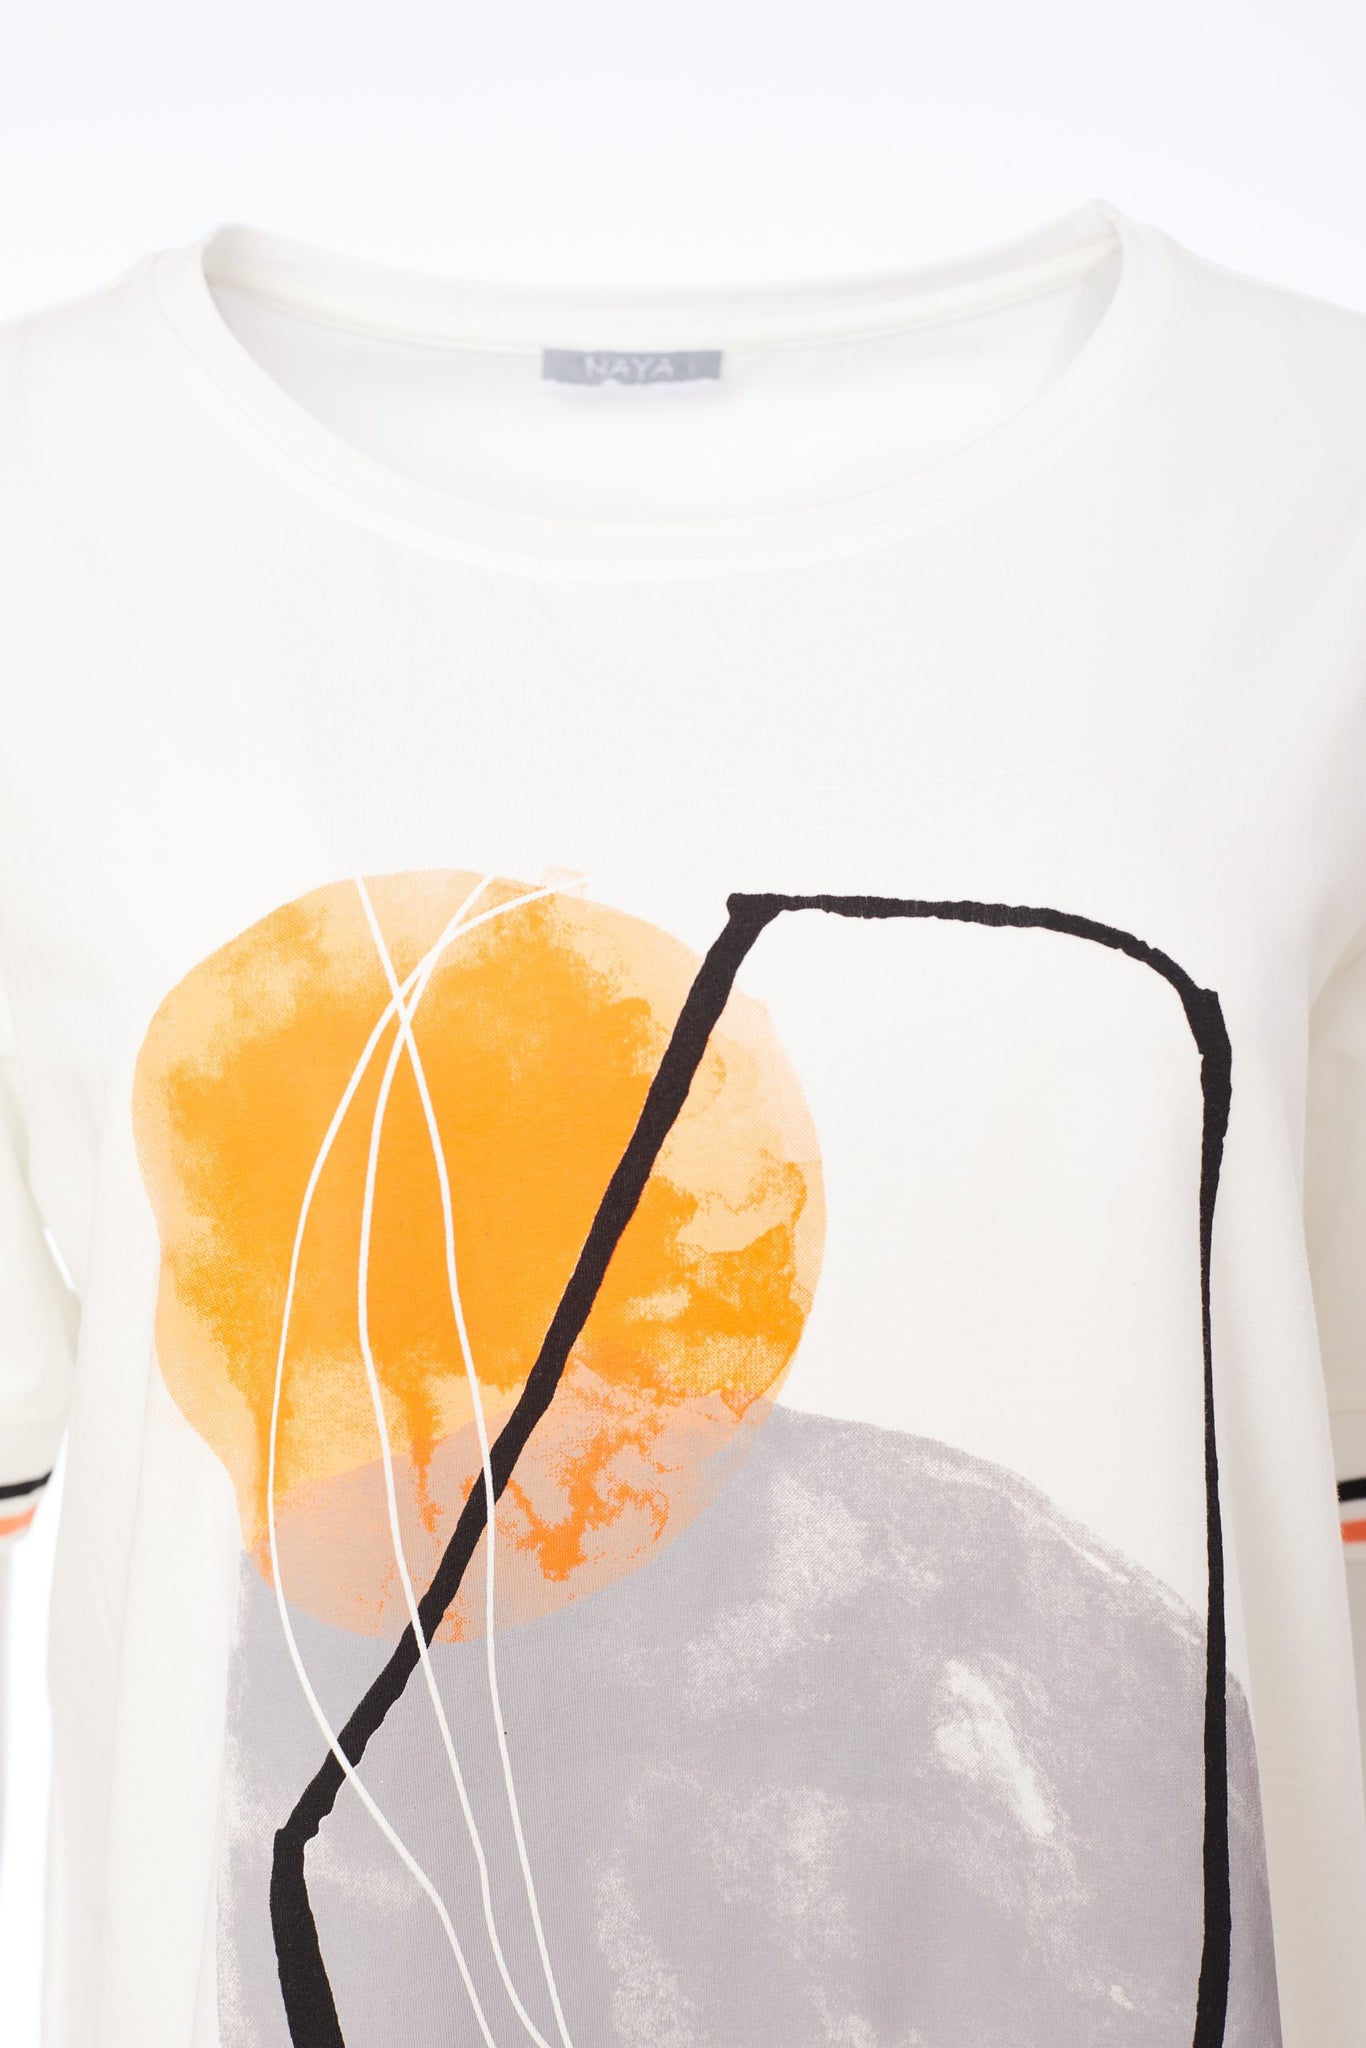 NAYA placement print cream top with orange and stone colour design